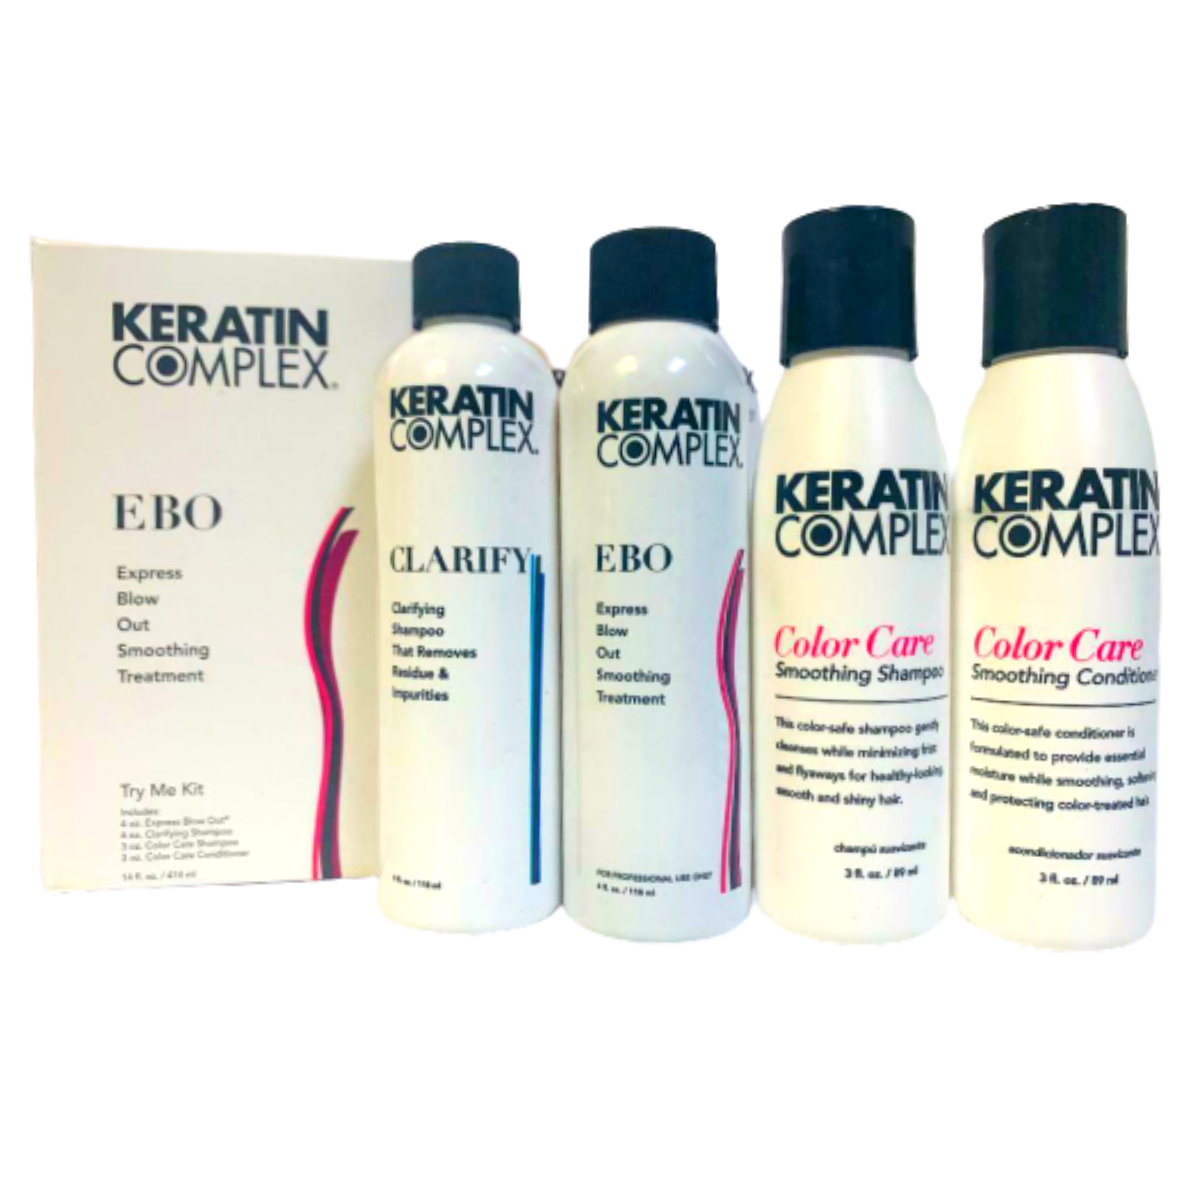 Keratin Complex Express Blow Out Smoothing Treatment Try Me Kit